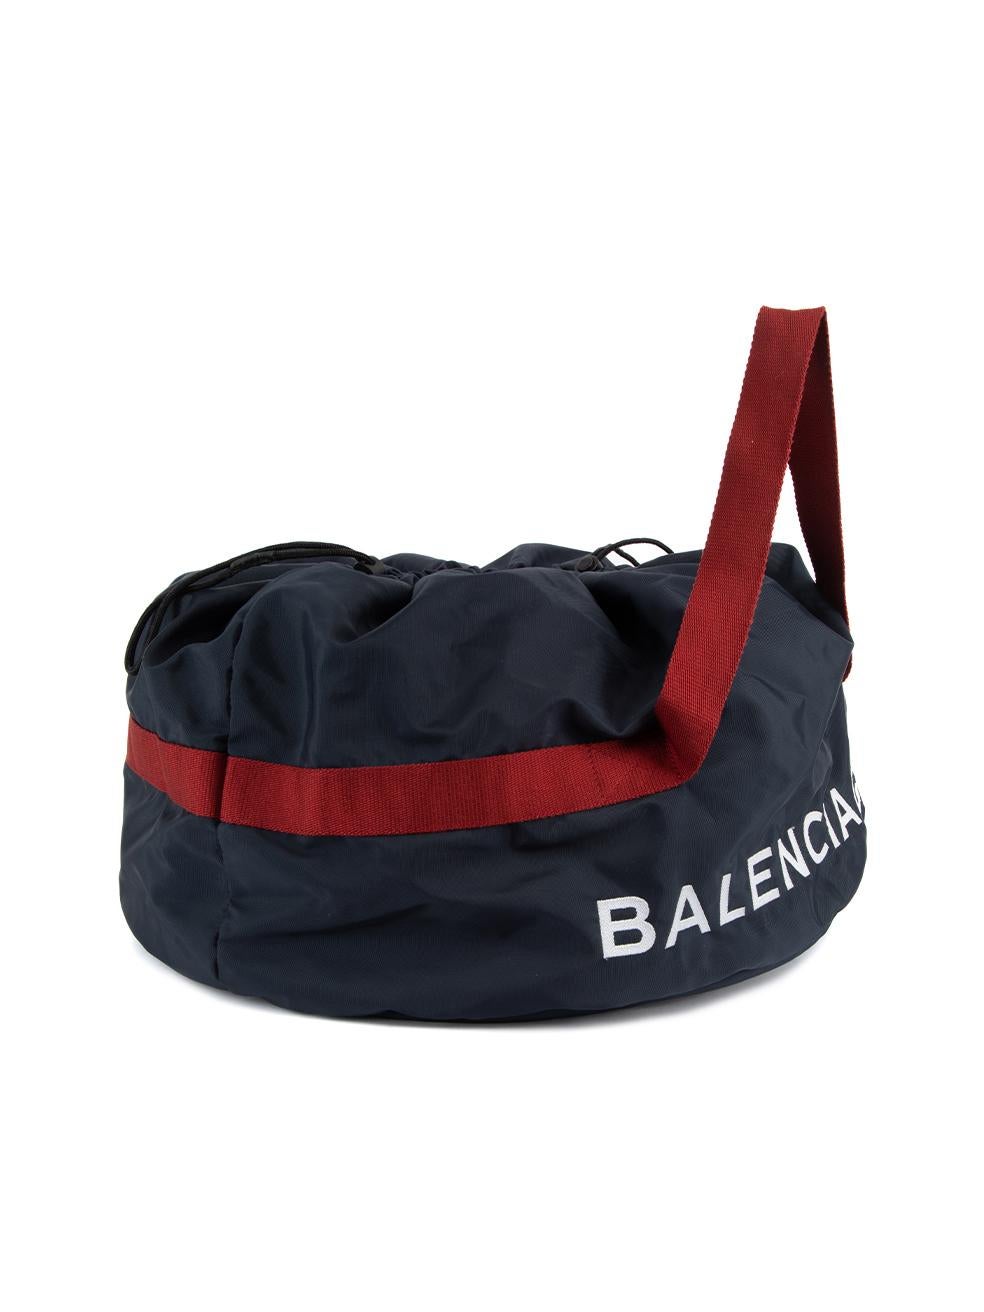 CONDITION is Very good. Minimal wear to bag is evident. Minimal wear to exterior material where scuffs can be seen on this used Balenciaga designer resale item. This item comes with original dustbag. Details Navy and red Cloth textile Oversized bag